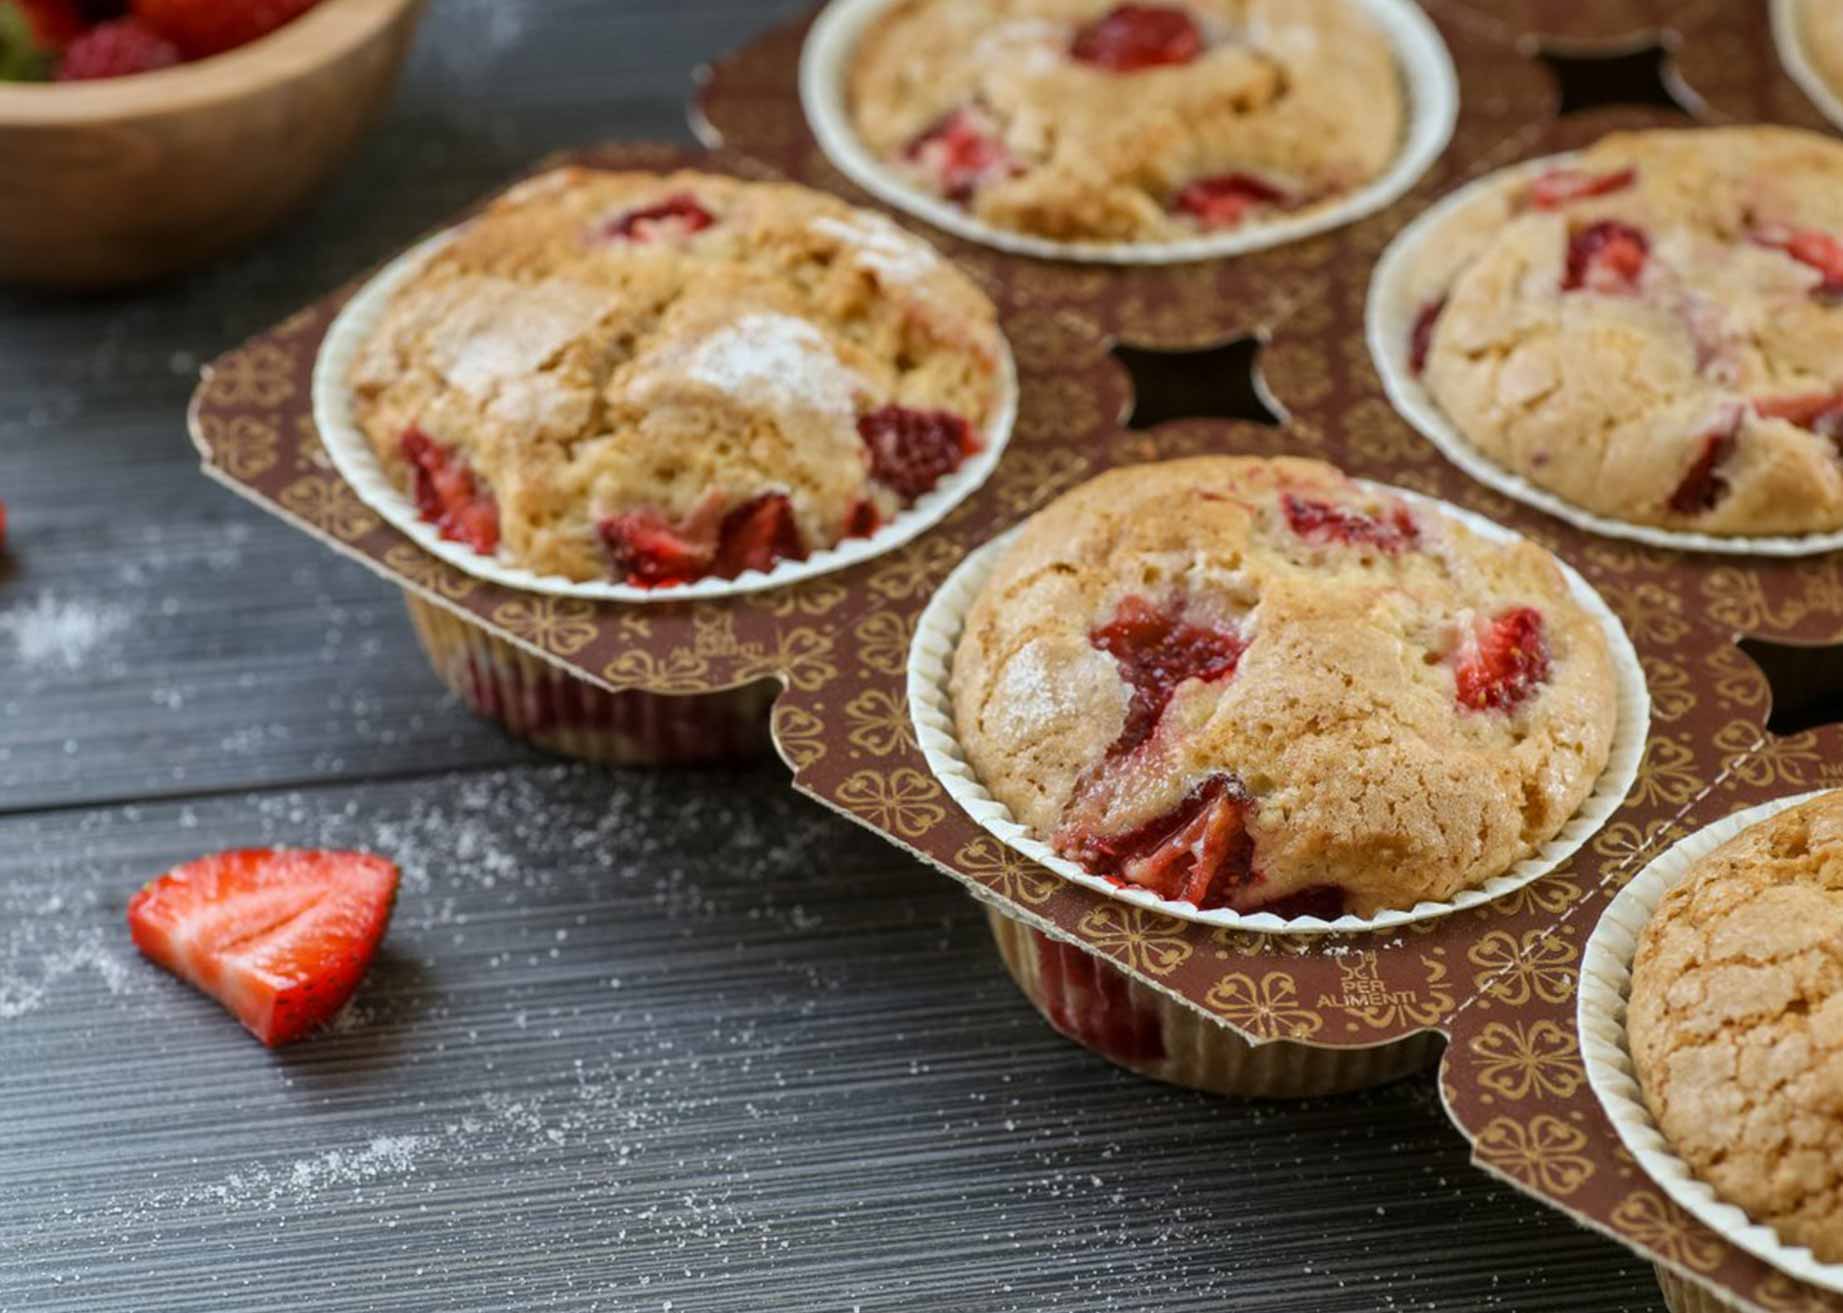 Novacart NTS muffin tray with strawberry muffins